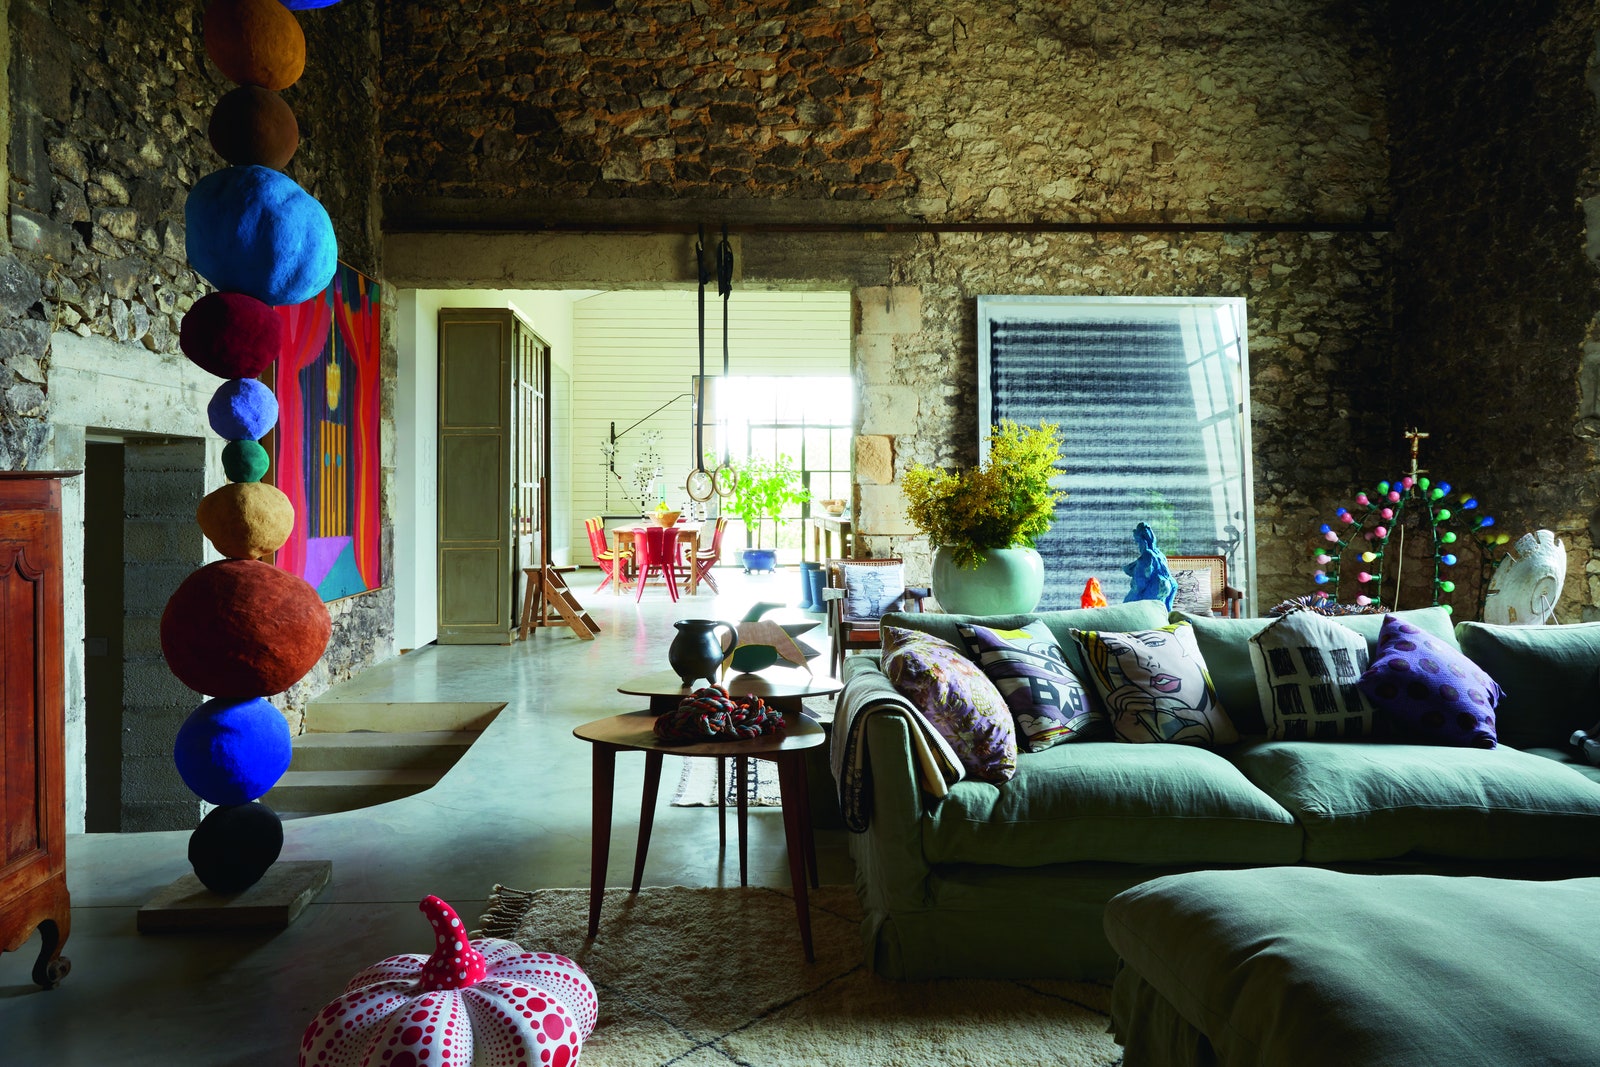 A living room with stonestacked walls and green sofa. To the left sands a colourful sculpture comprised of stacked...